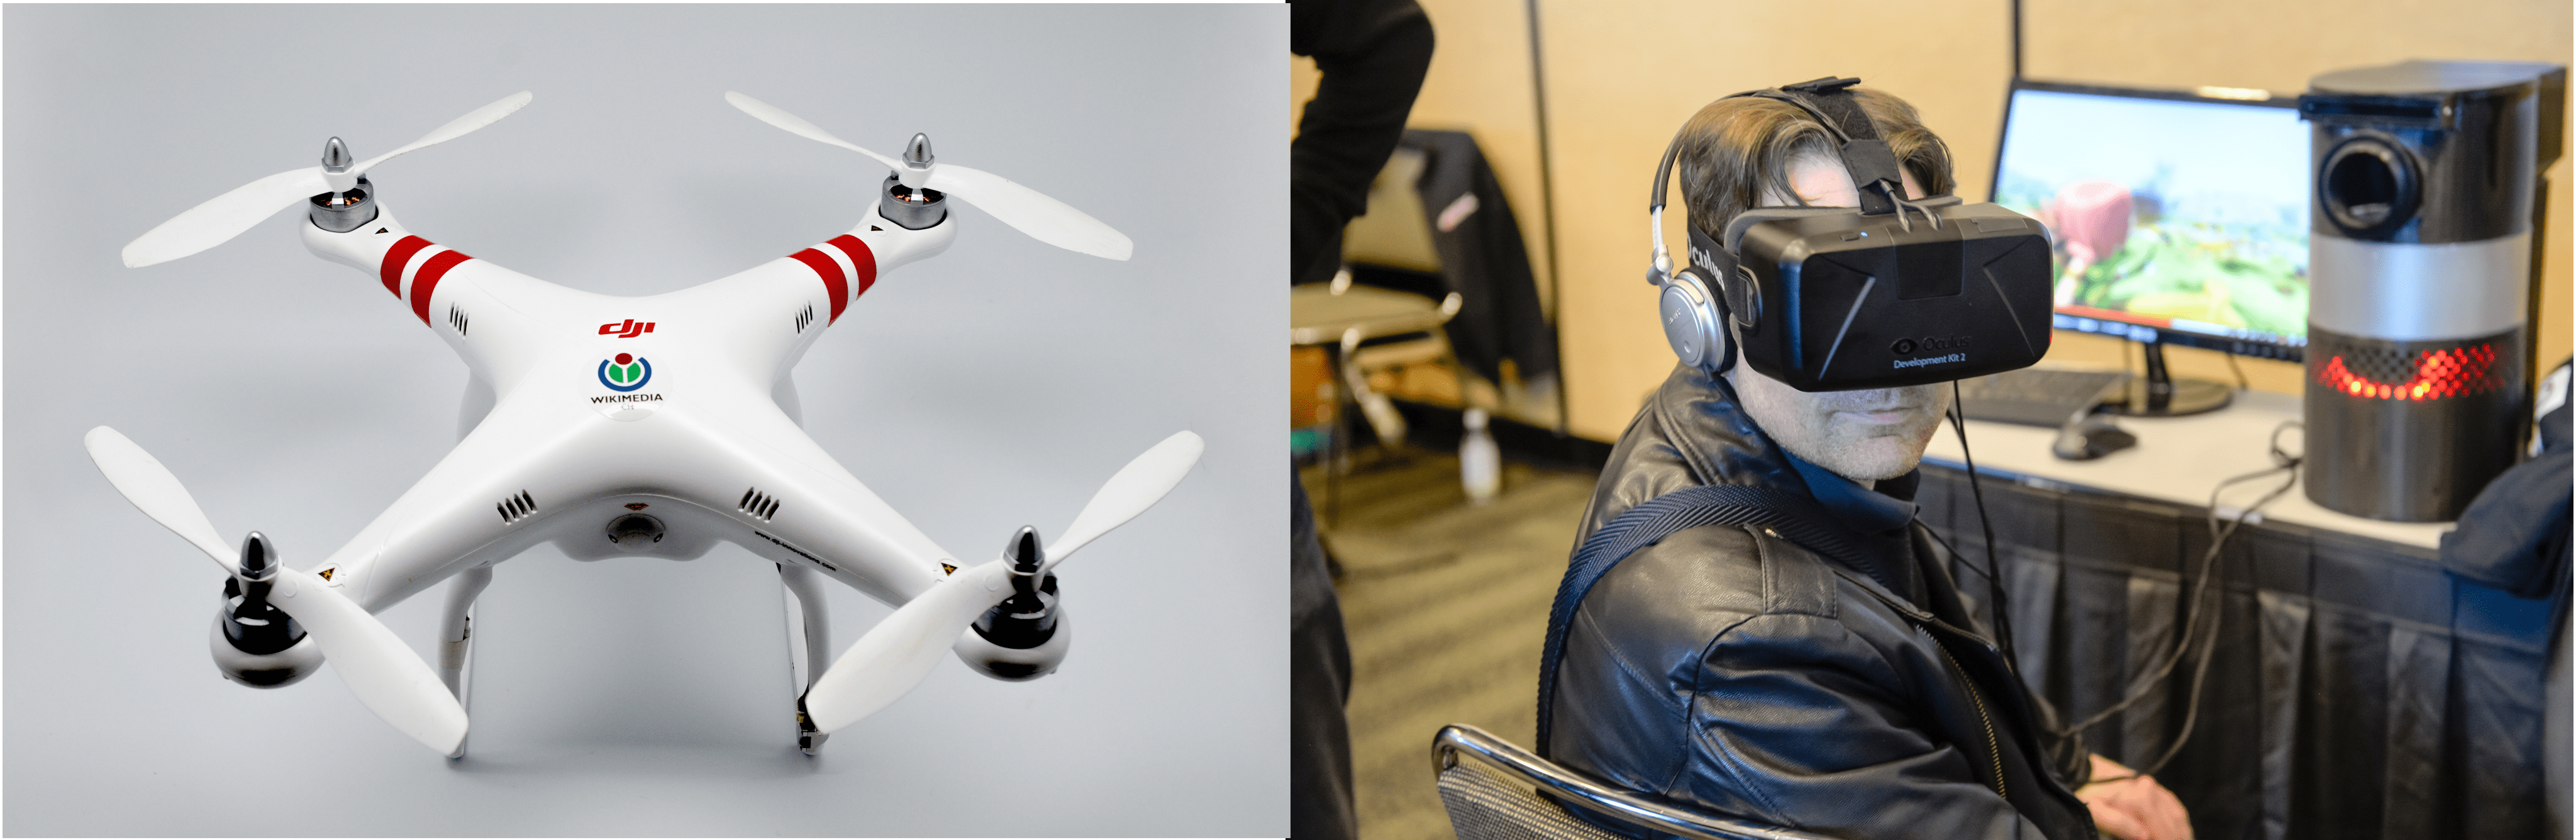 Controlling a Drone With a Head Mounted Display